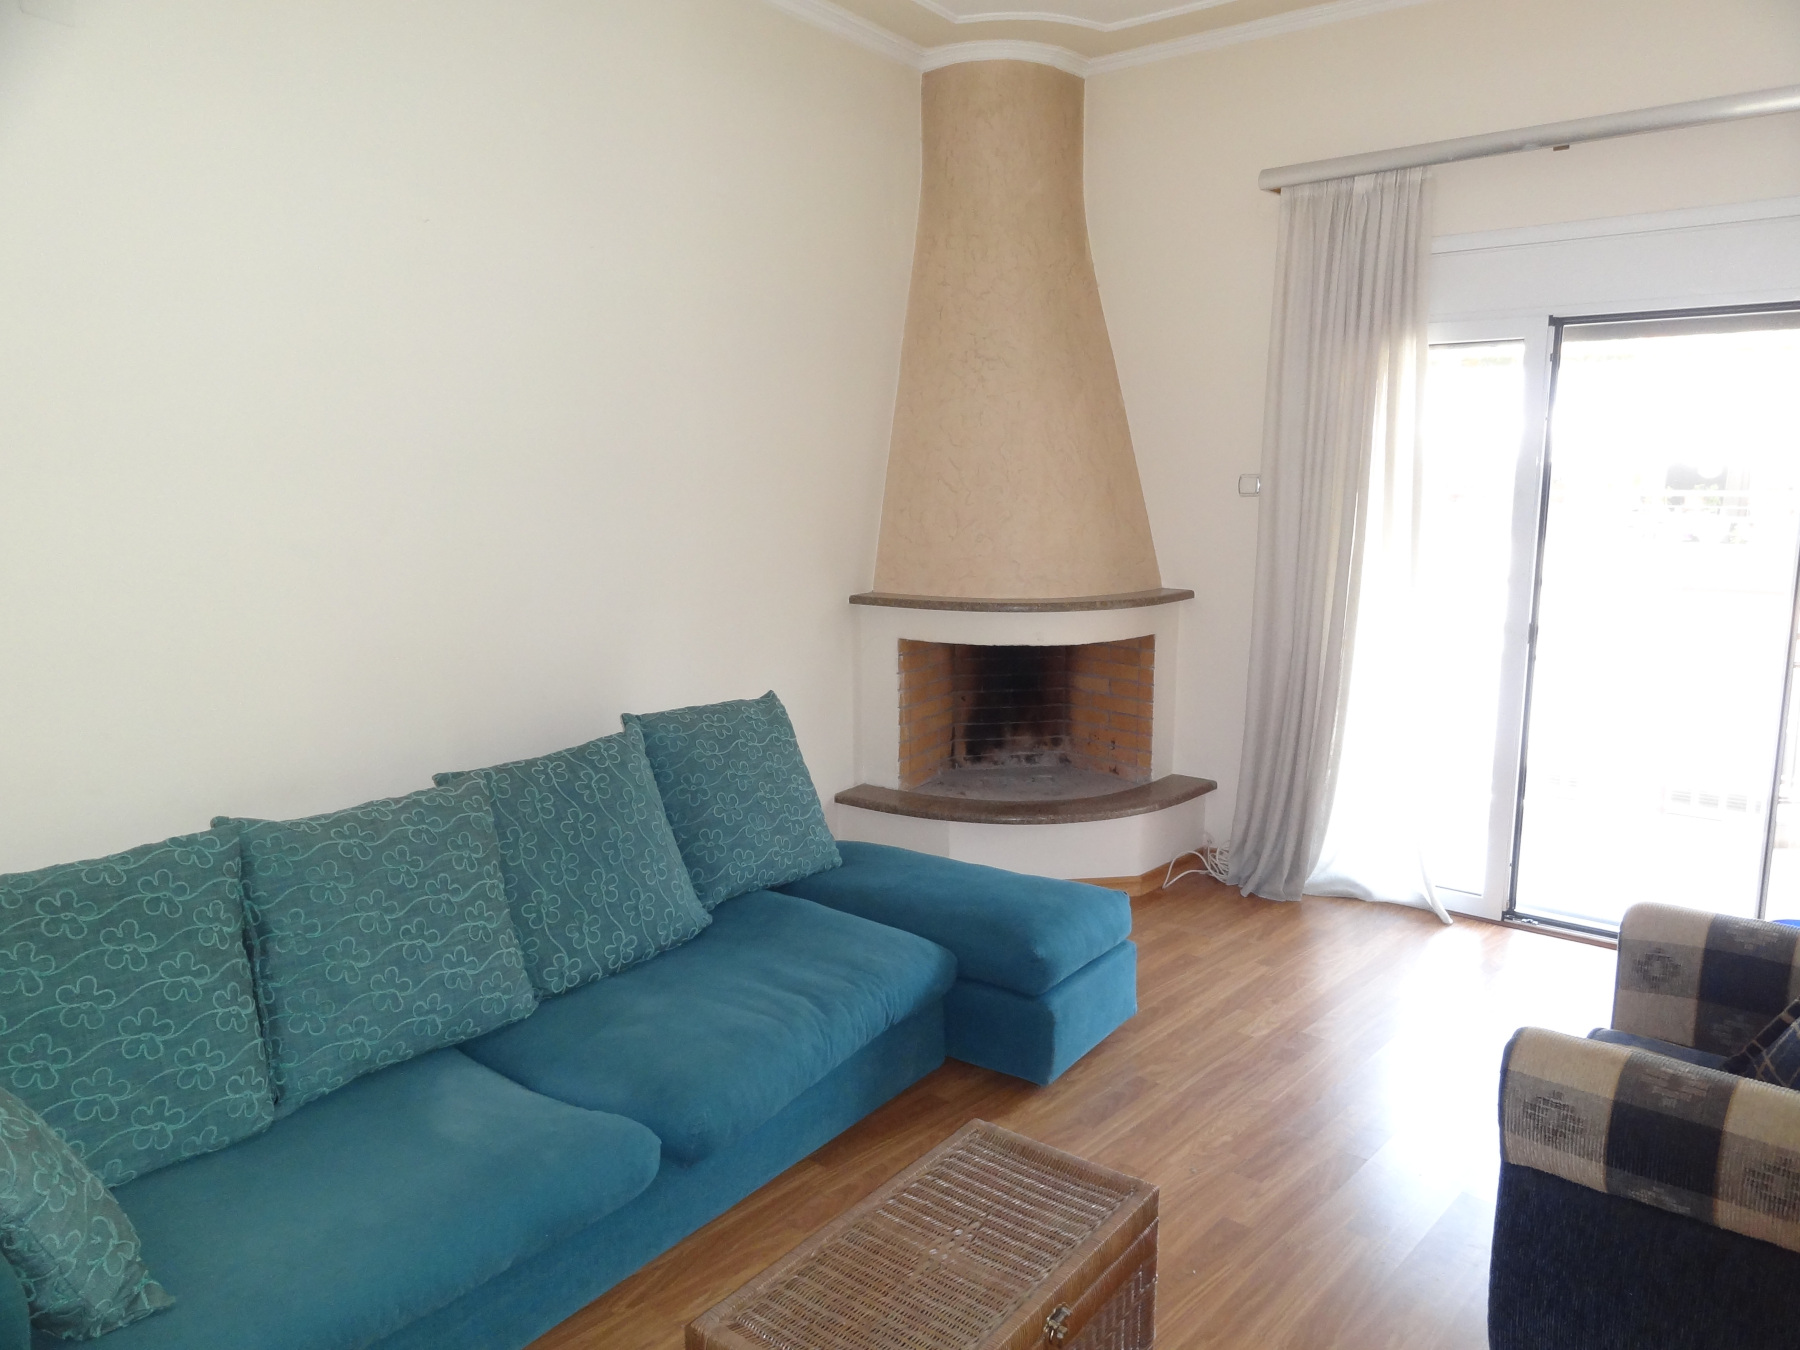 For rent fully furnished and equipped 1 bedroom apartment 45 sq.m. 3rd floor in the center of Ioannina near Dodoni Avenue